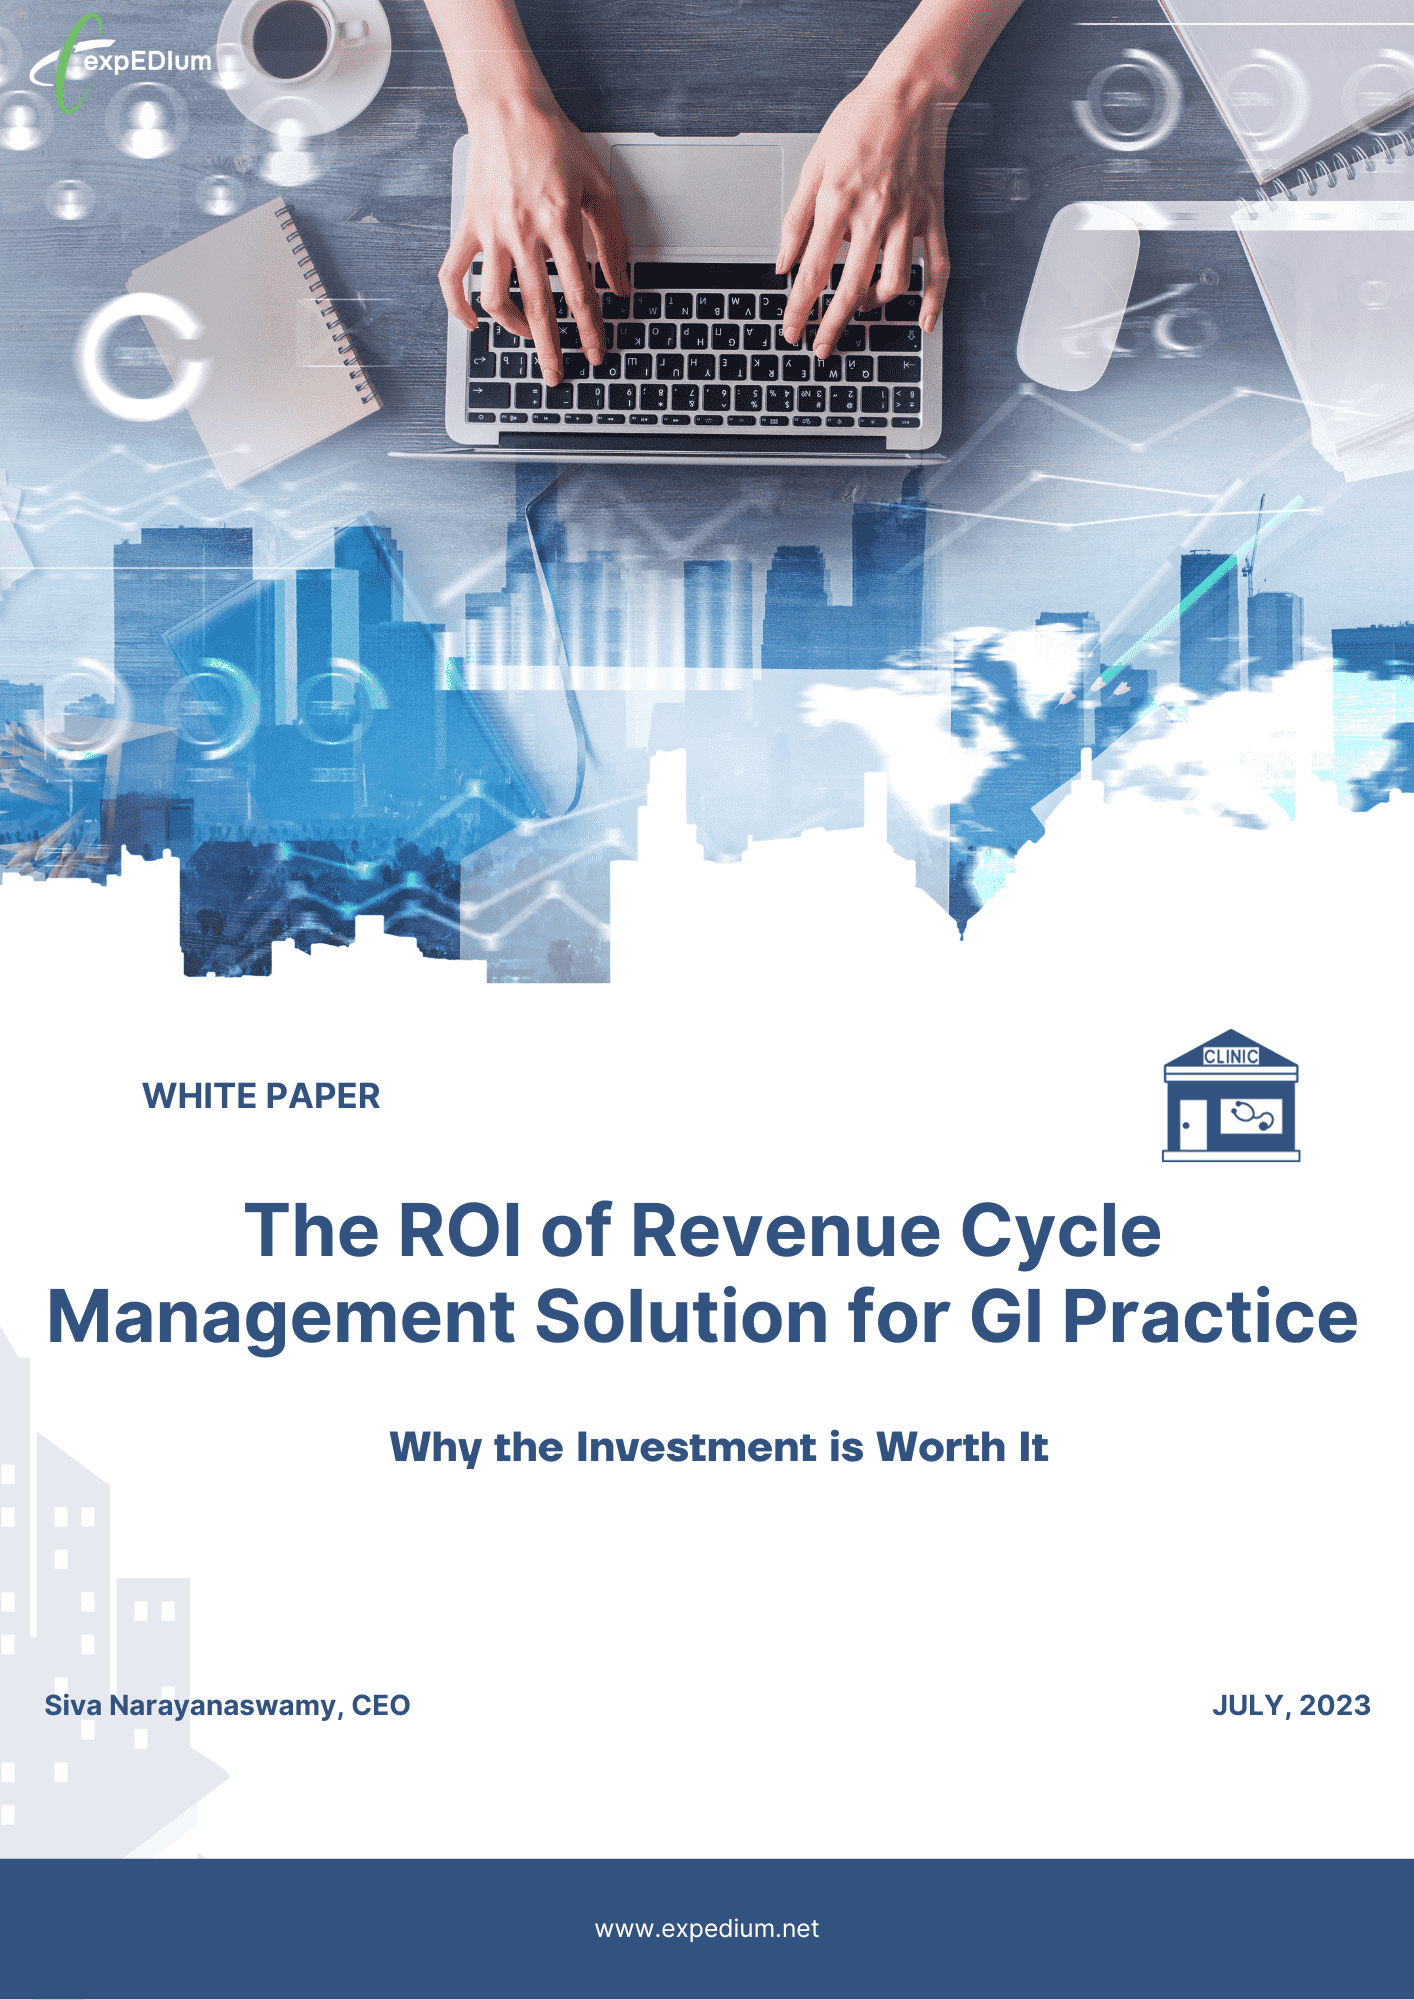 The ROI of revenue cycle management solution for GI practice